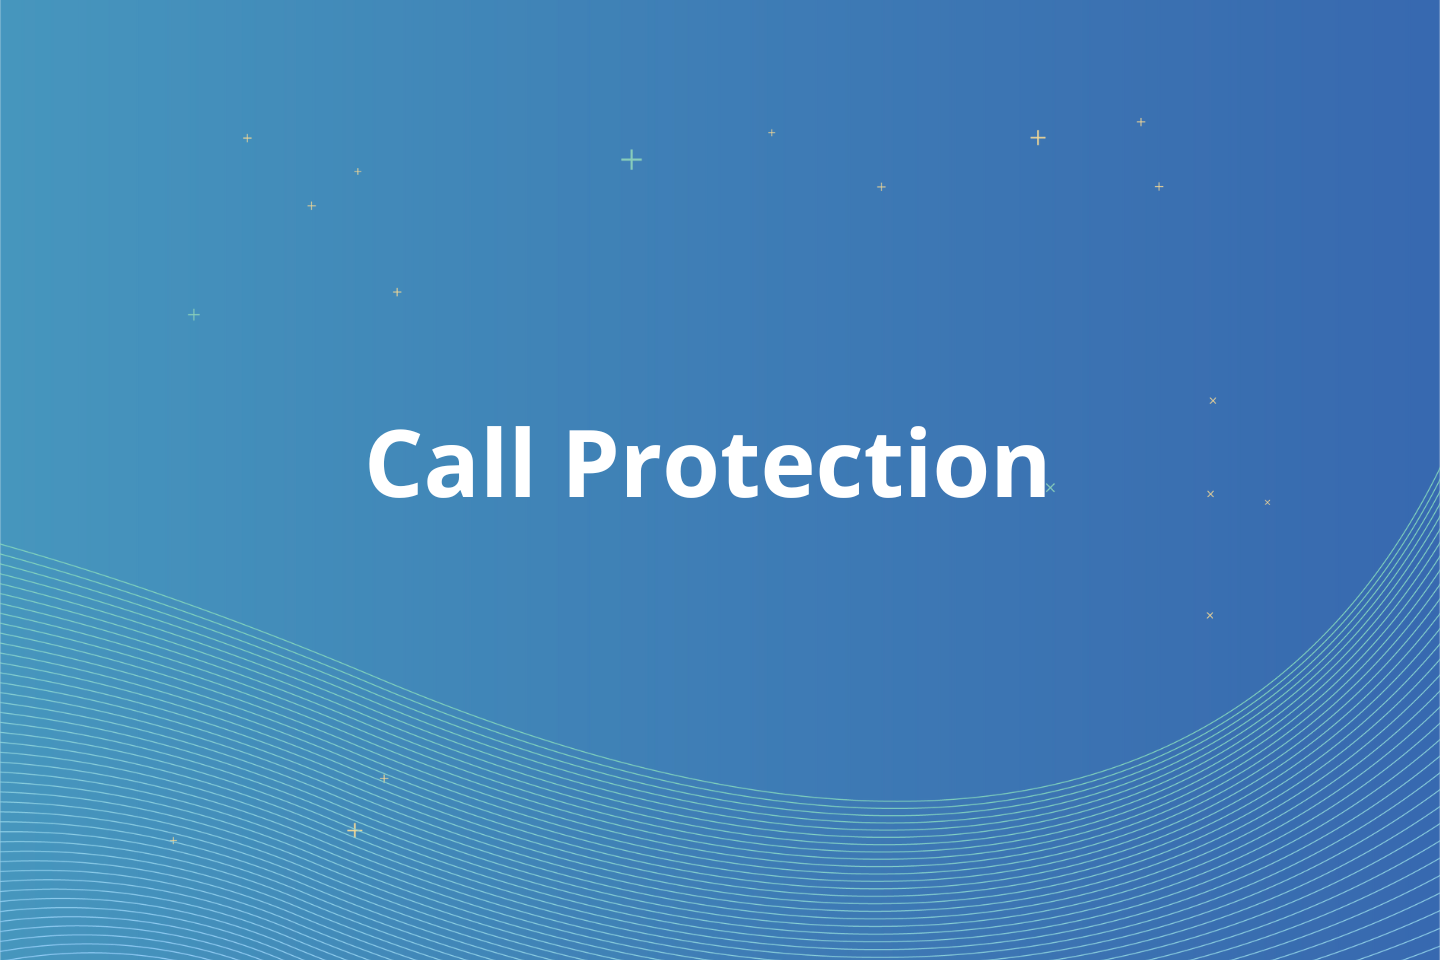 What Does “Call Protection” Mean?